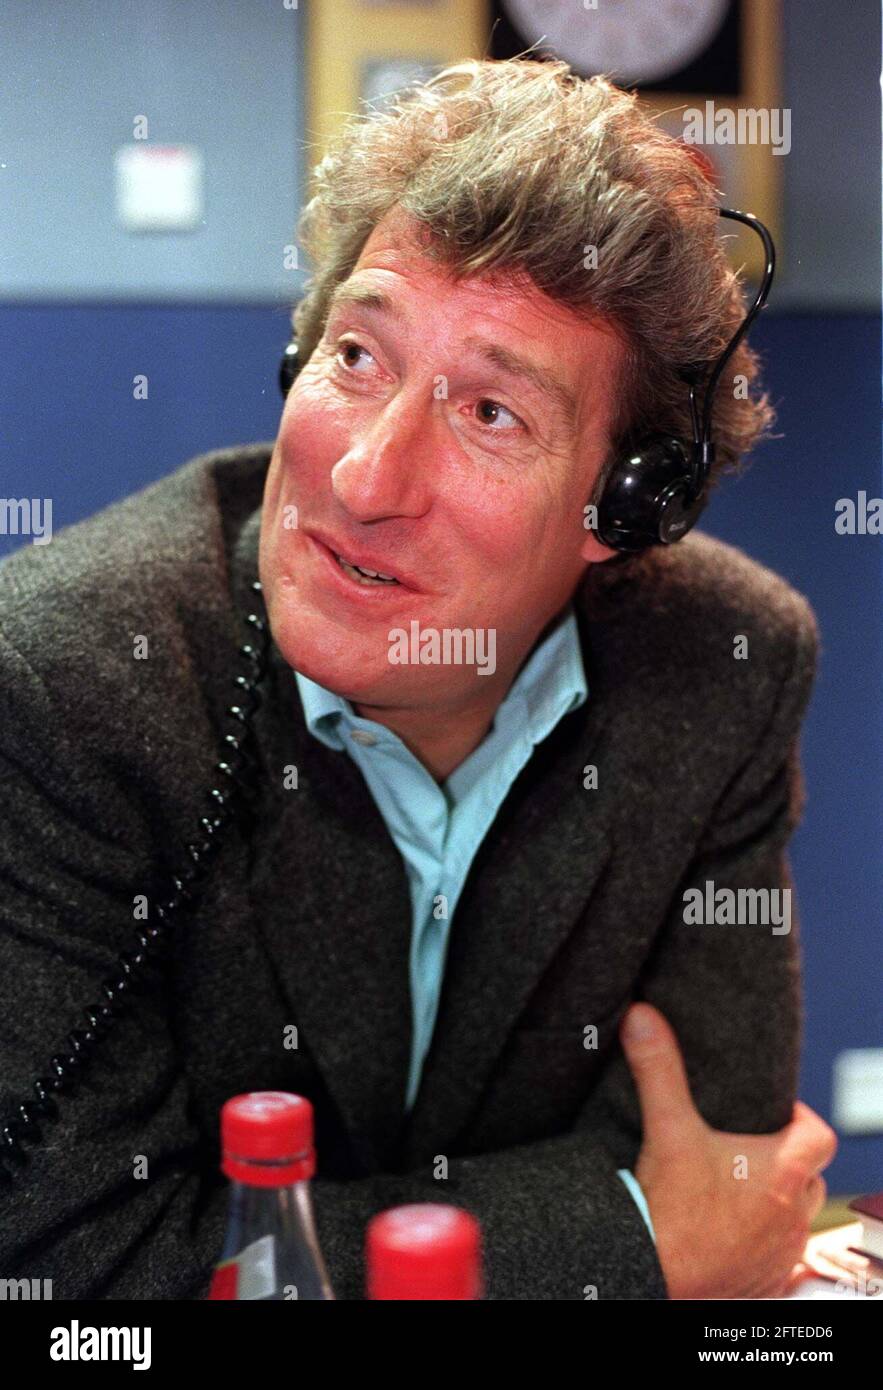 File photo dated 05/10/98 of Jeremy Paxman during a photocall in London where he presented Radio 4's 'Start The Week'. Jeremy Paxman has revealed he has been diagnosed with Parkinson's disease. Issue date: Friday May 21, 2021. Stock Photo